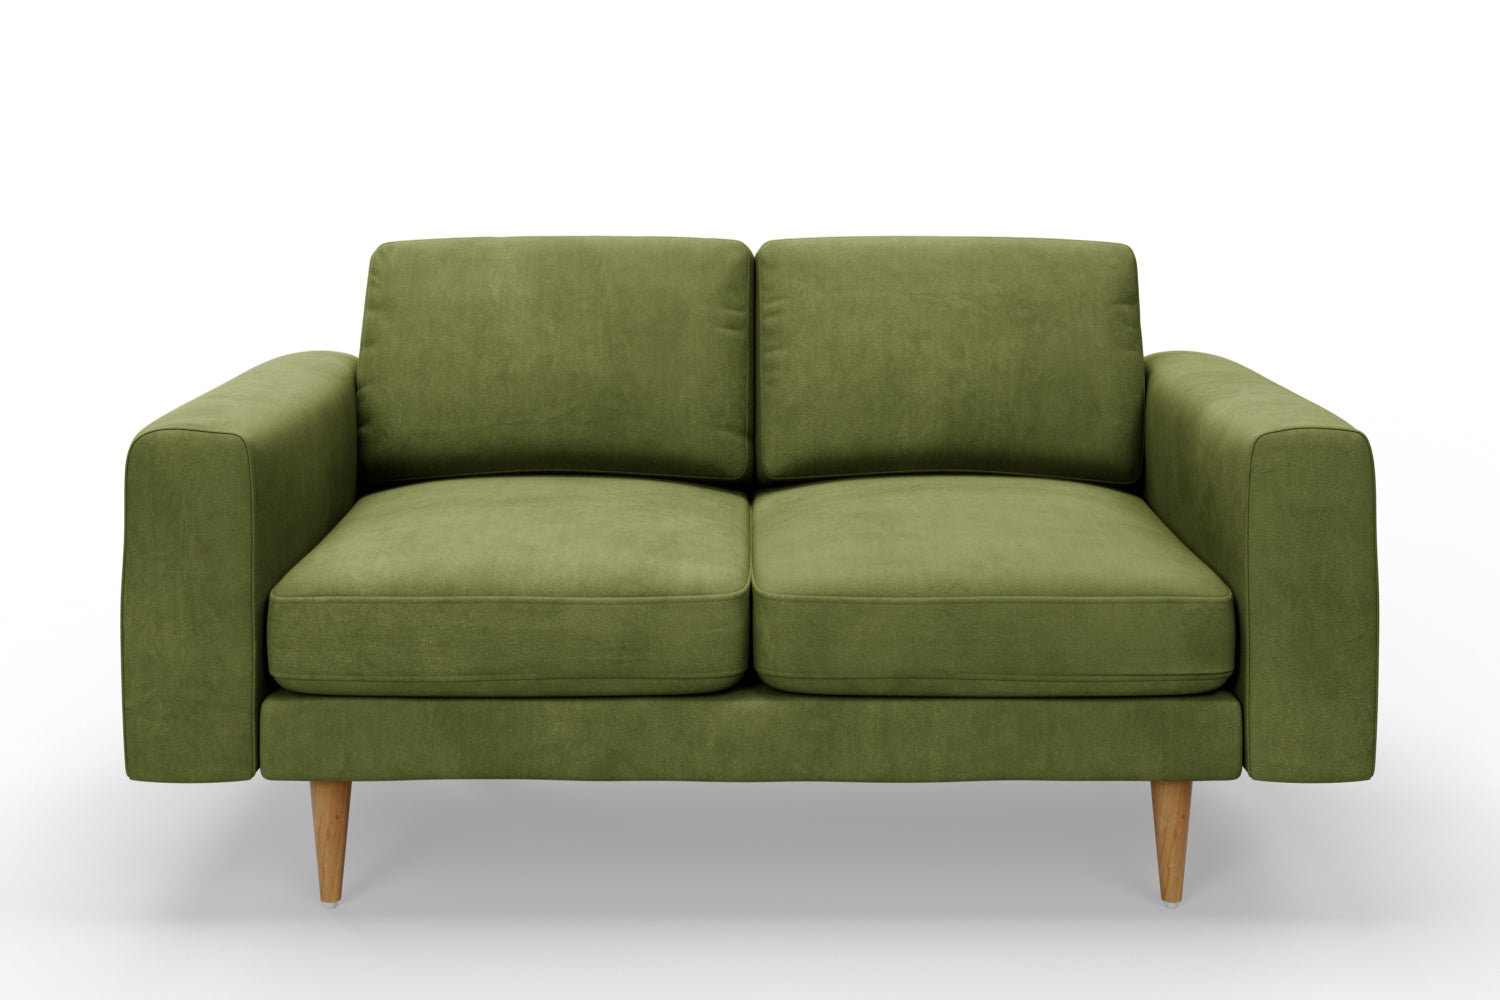 SNUG | The Big Chill 2 Seater Sofa in Olive variant_40414877745200